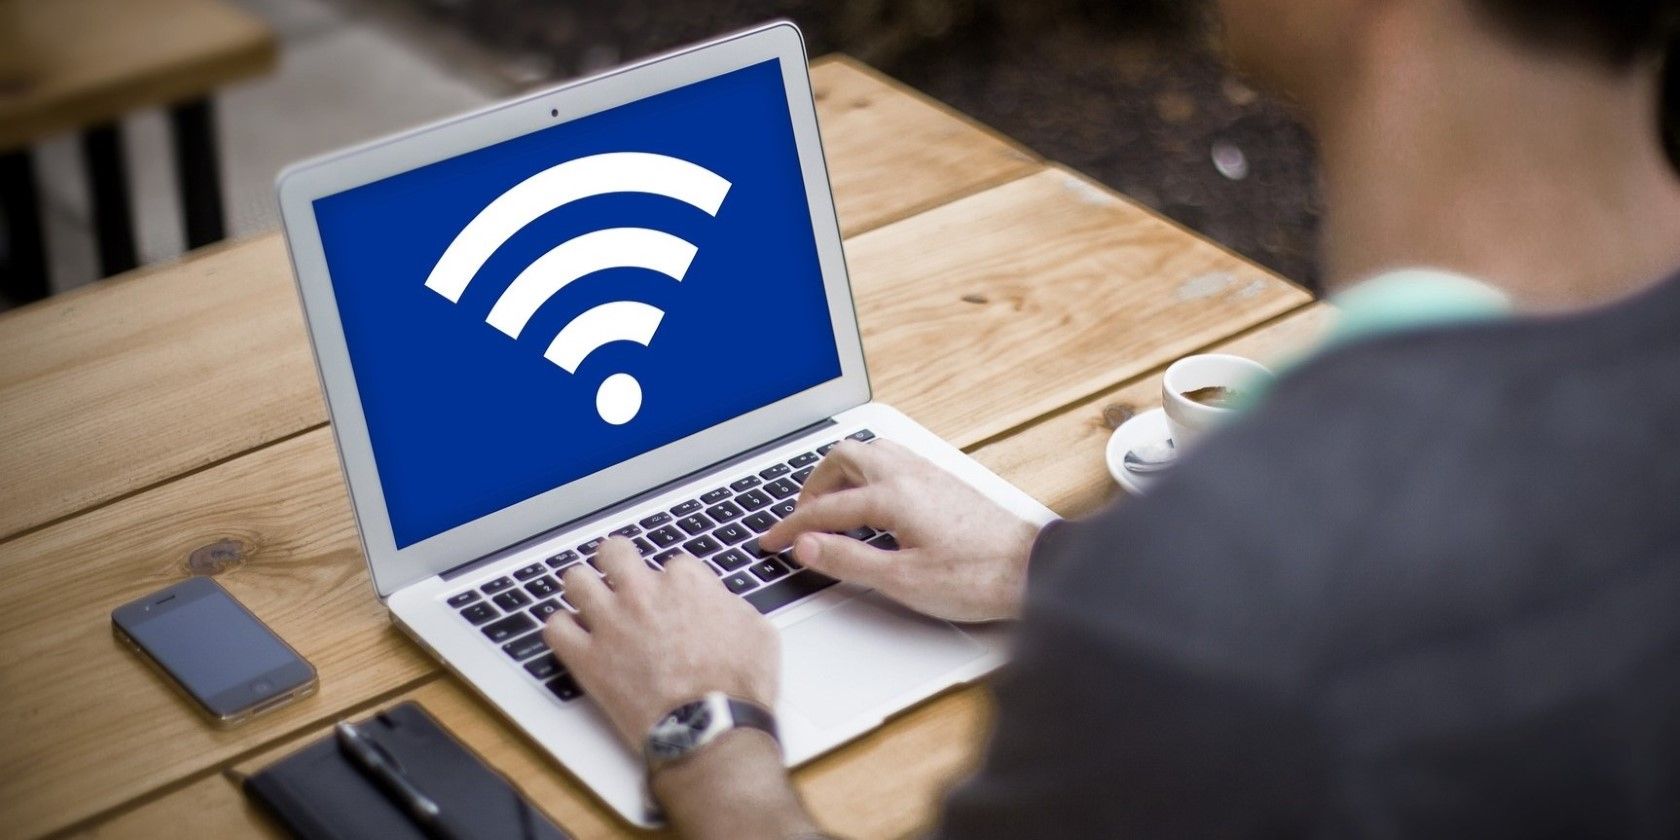 How to Set Up a Mobile Hotspot on Windows 11